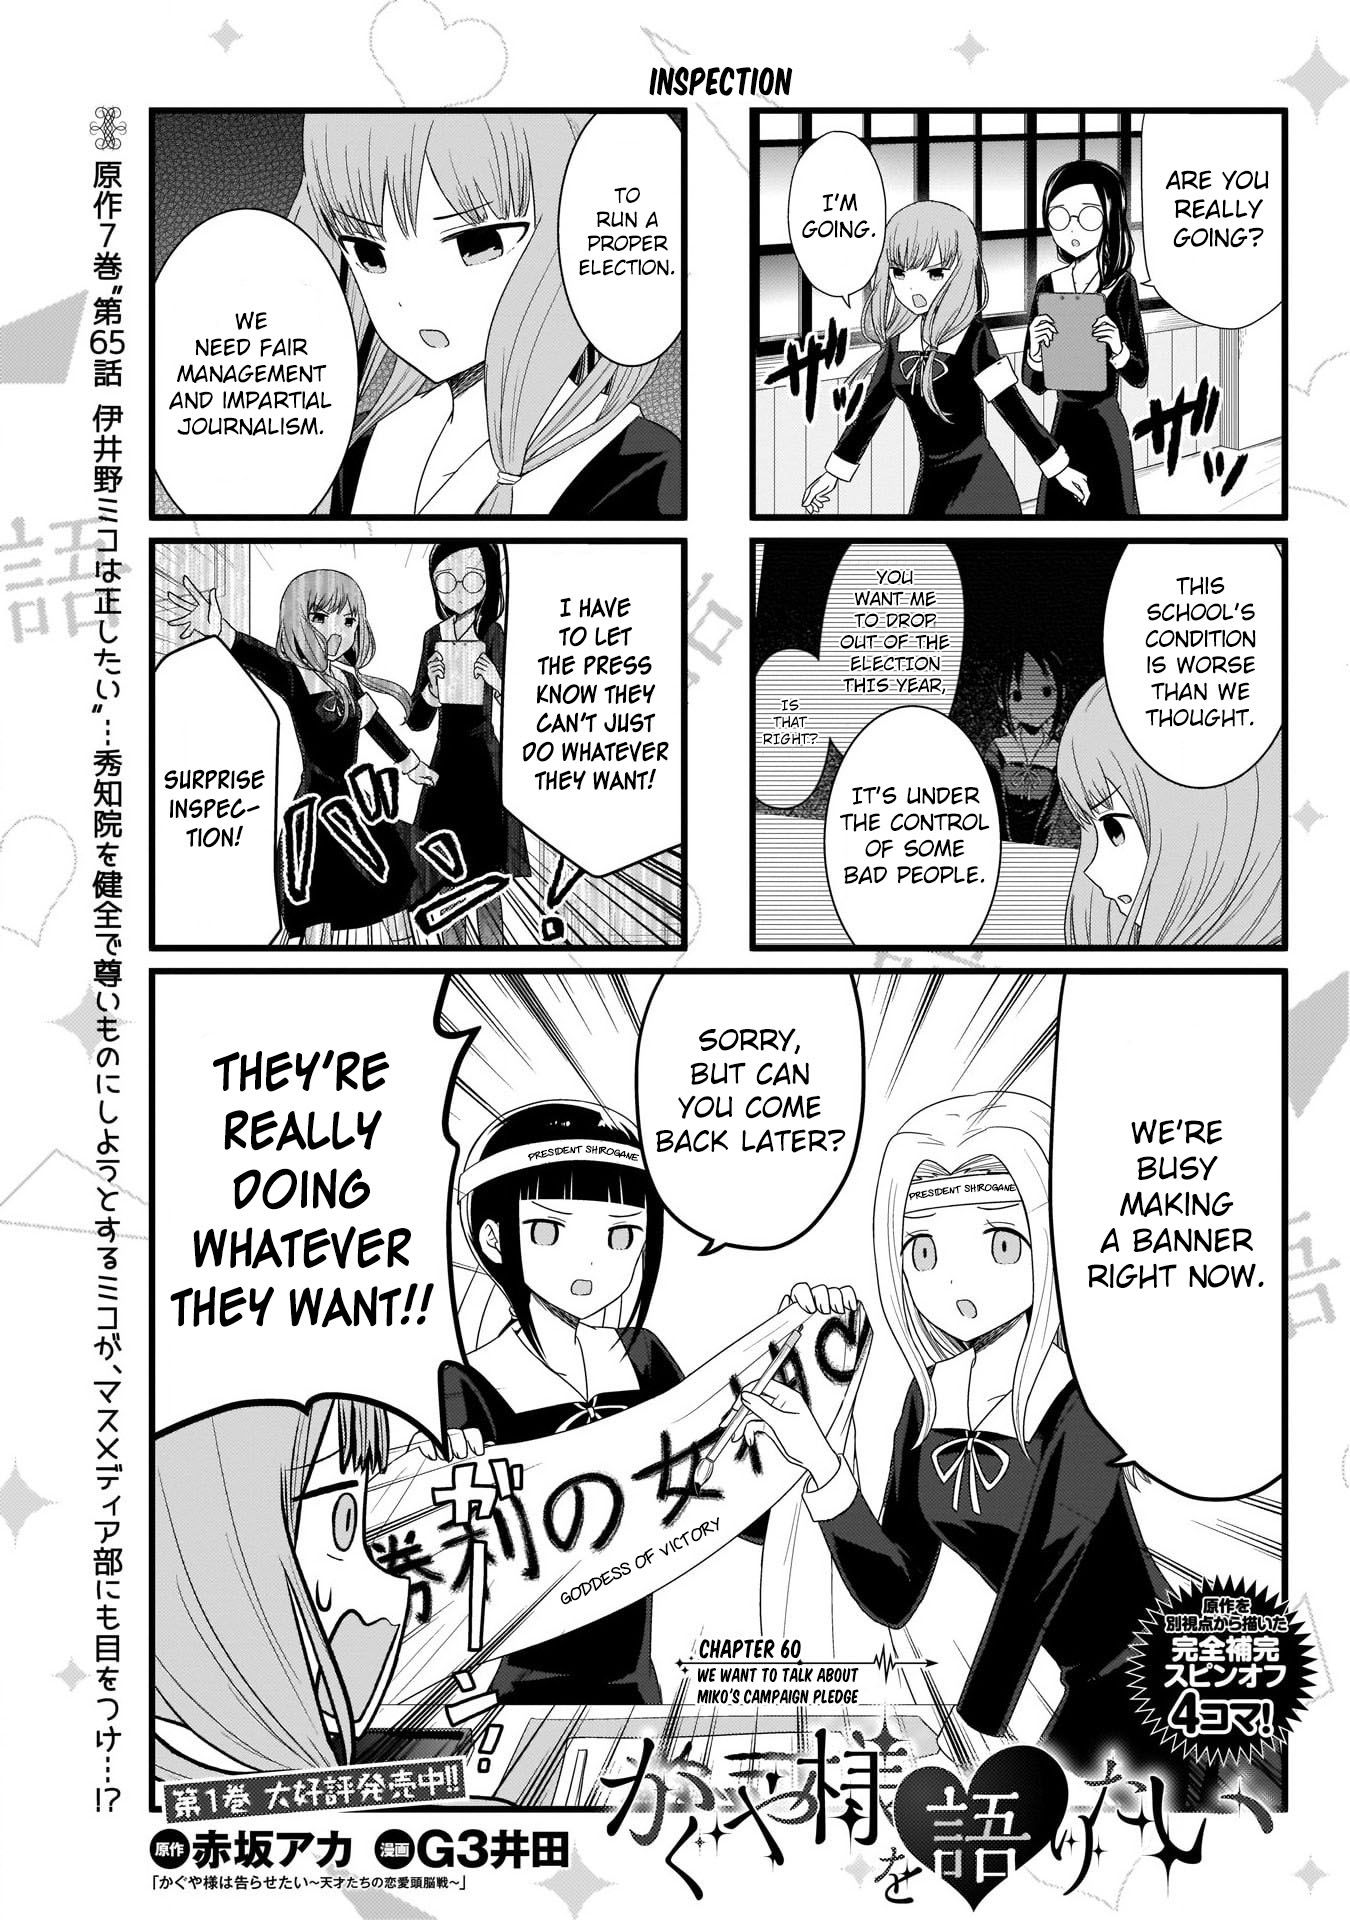 We Want To Talk About Kaguya 60 1